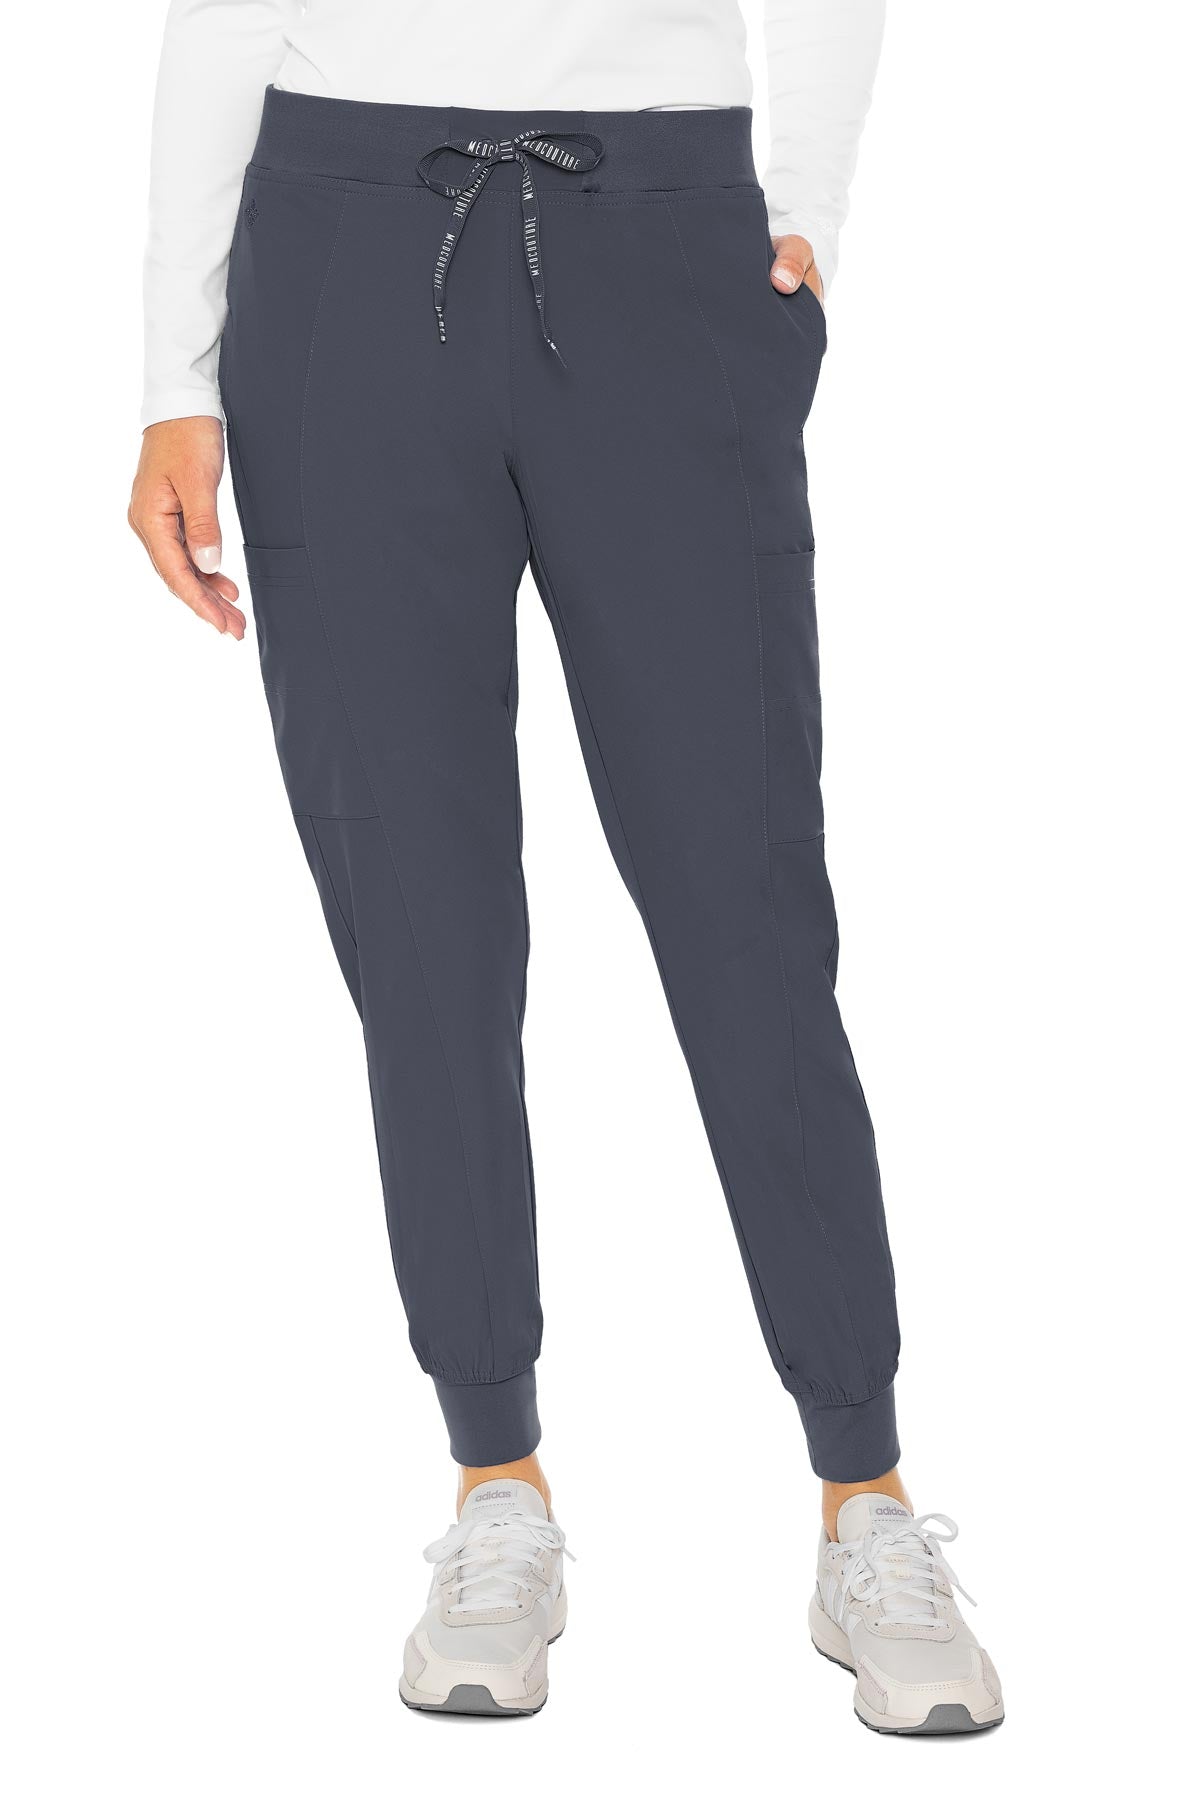 MED COUTURE Seamed Jogger